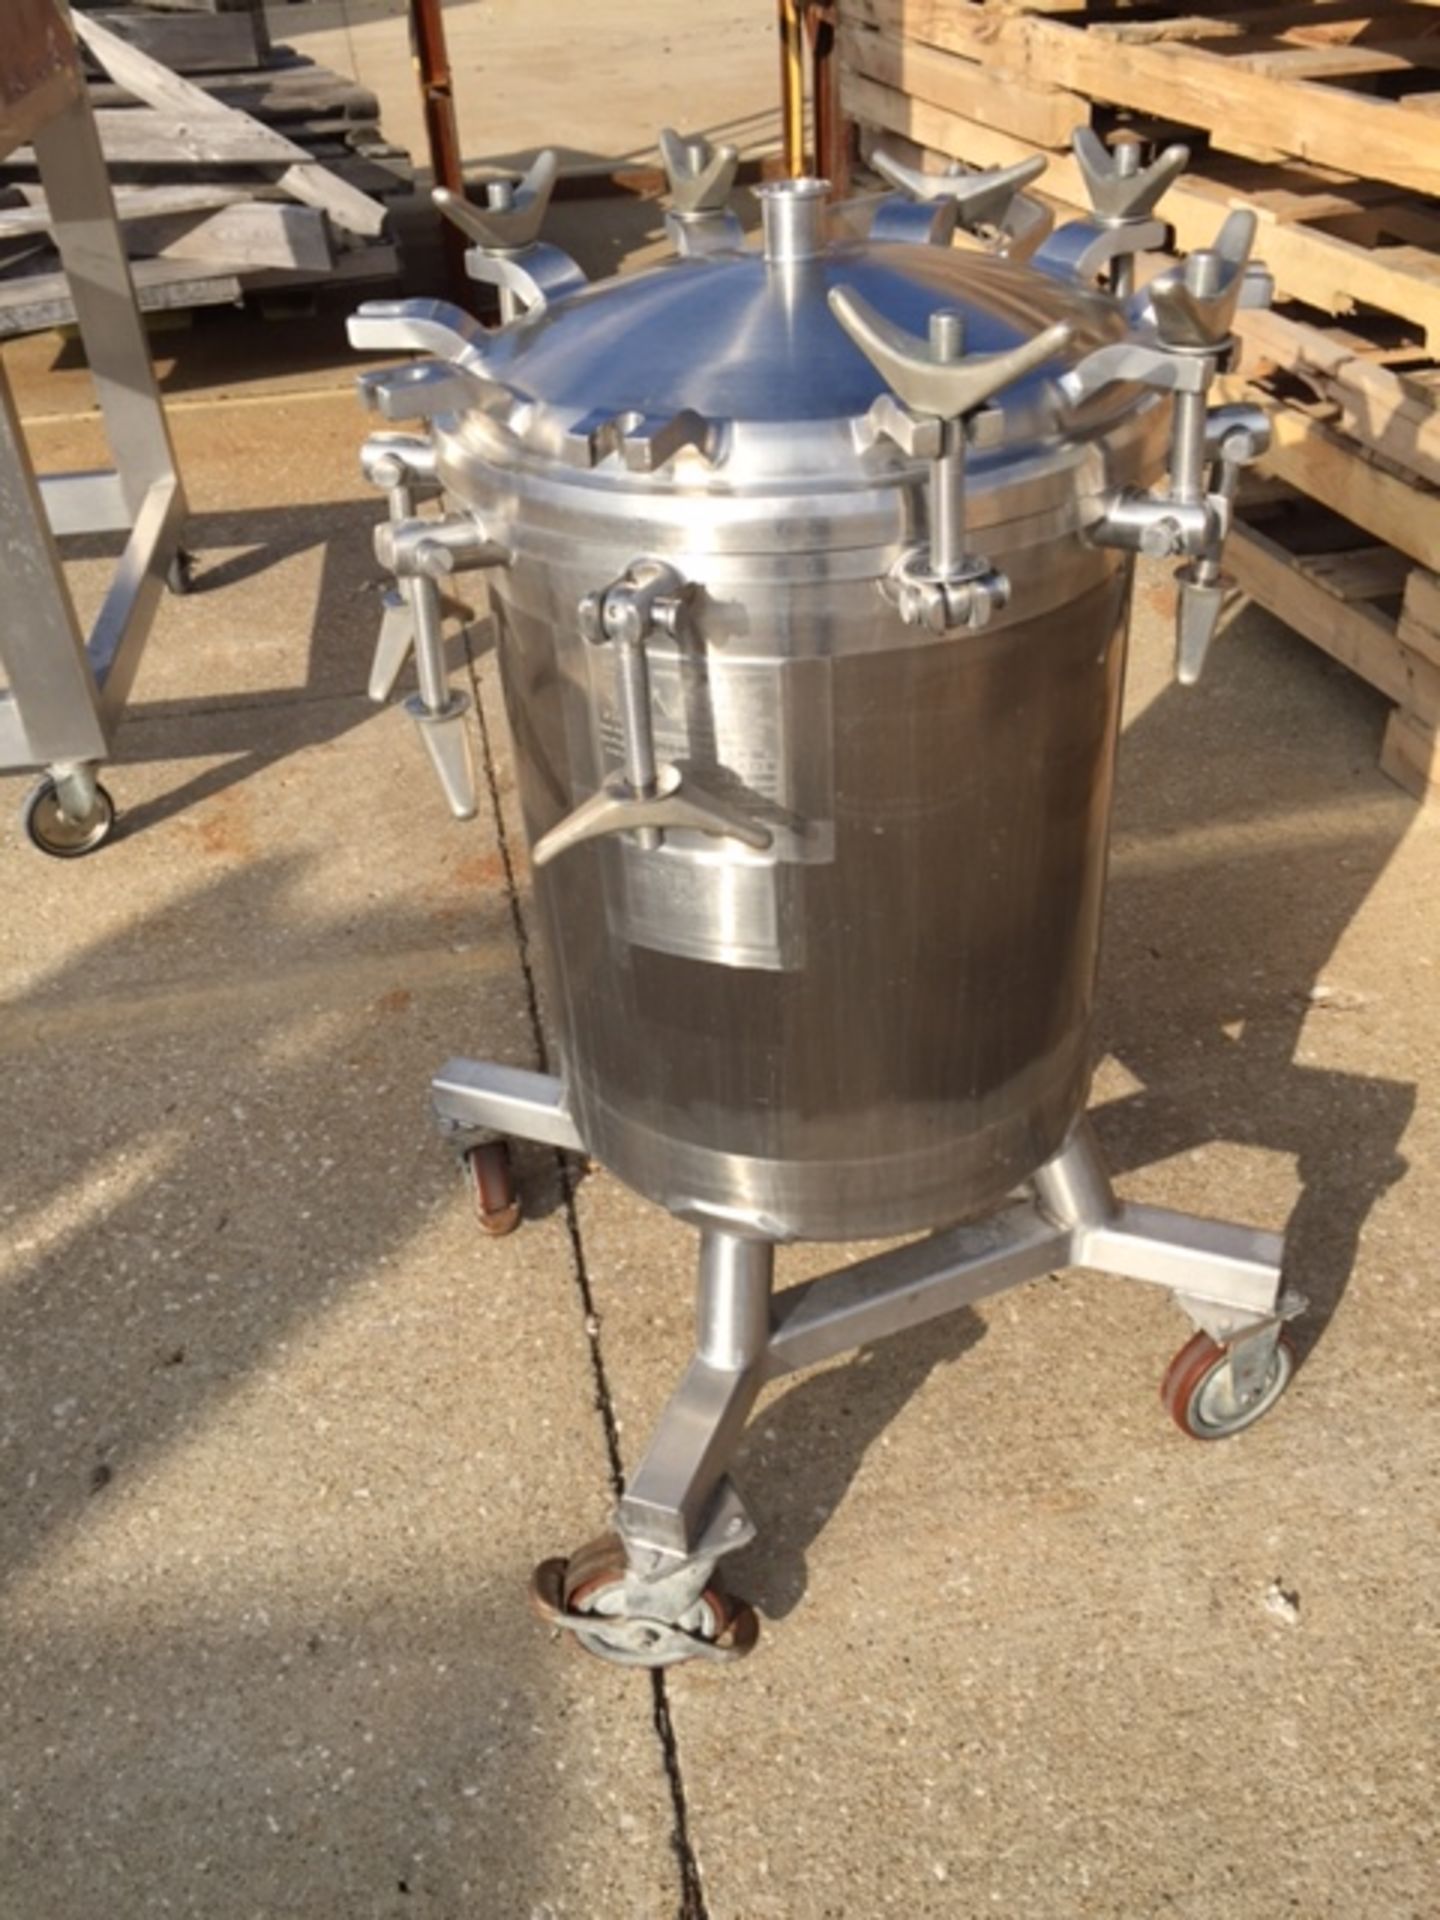 Pressure Tank, 150 Liter, 316 SS, 100 PSIG at 100 Deg. F, Certified by Precision Stainless Inc. - Image 2 of 6